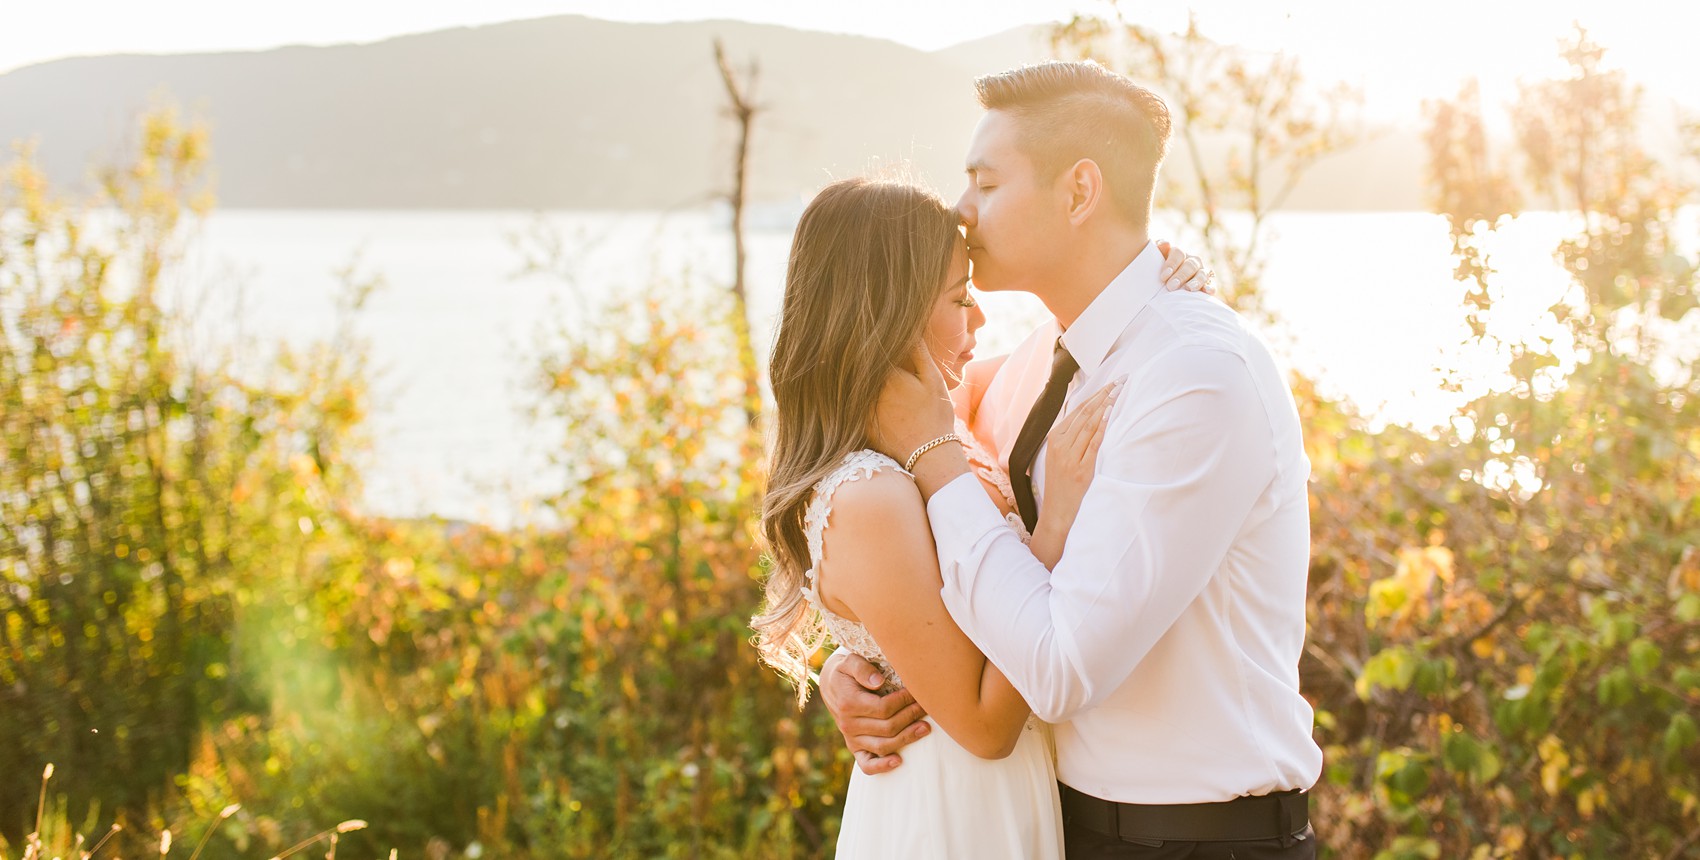 West Vancouver Whytecliff Engagement photos forehead kiss in sunset light